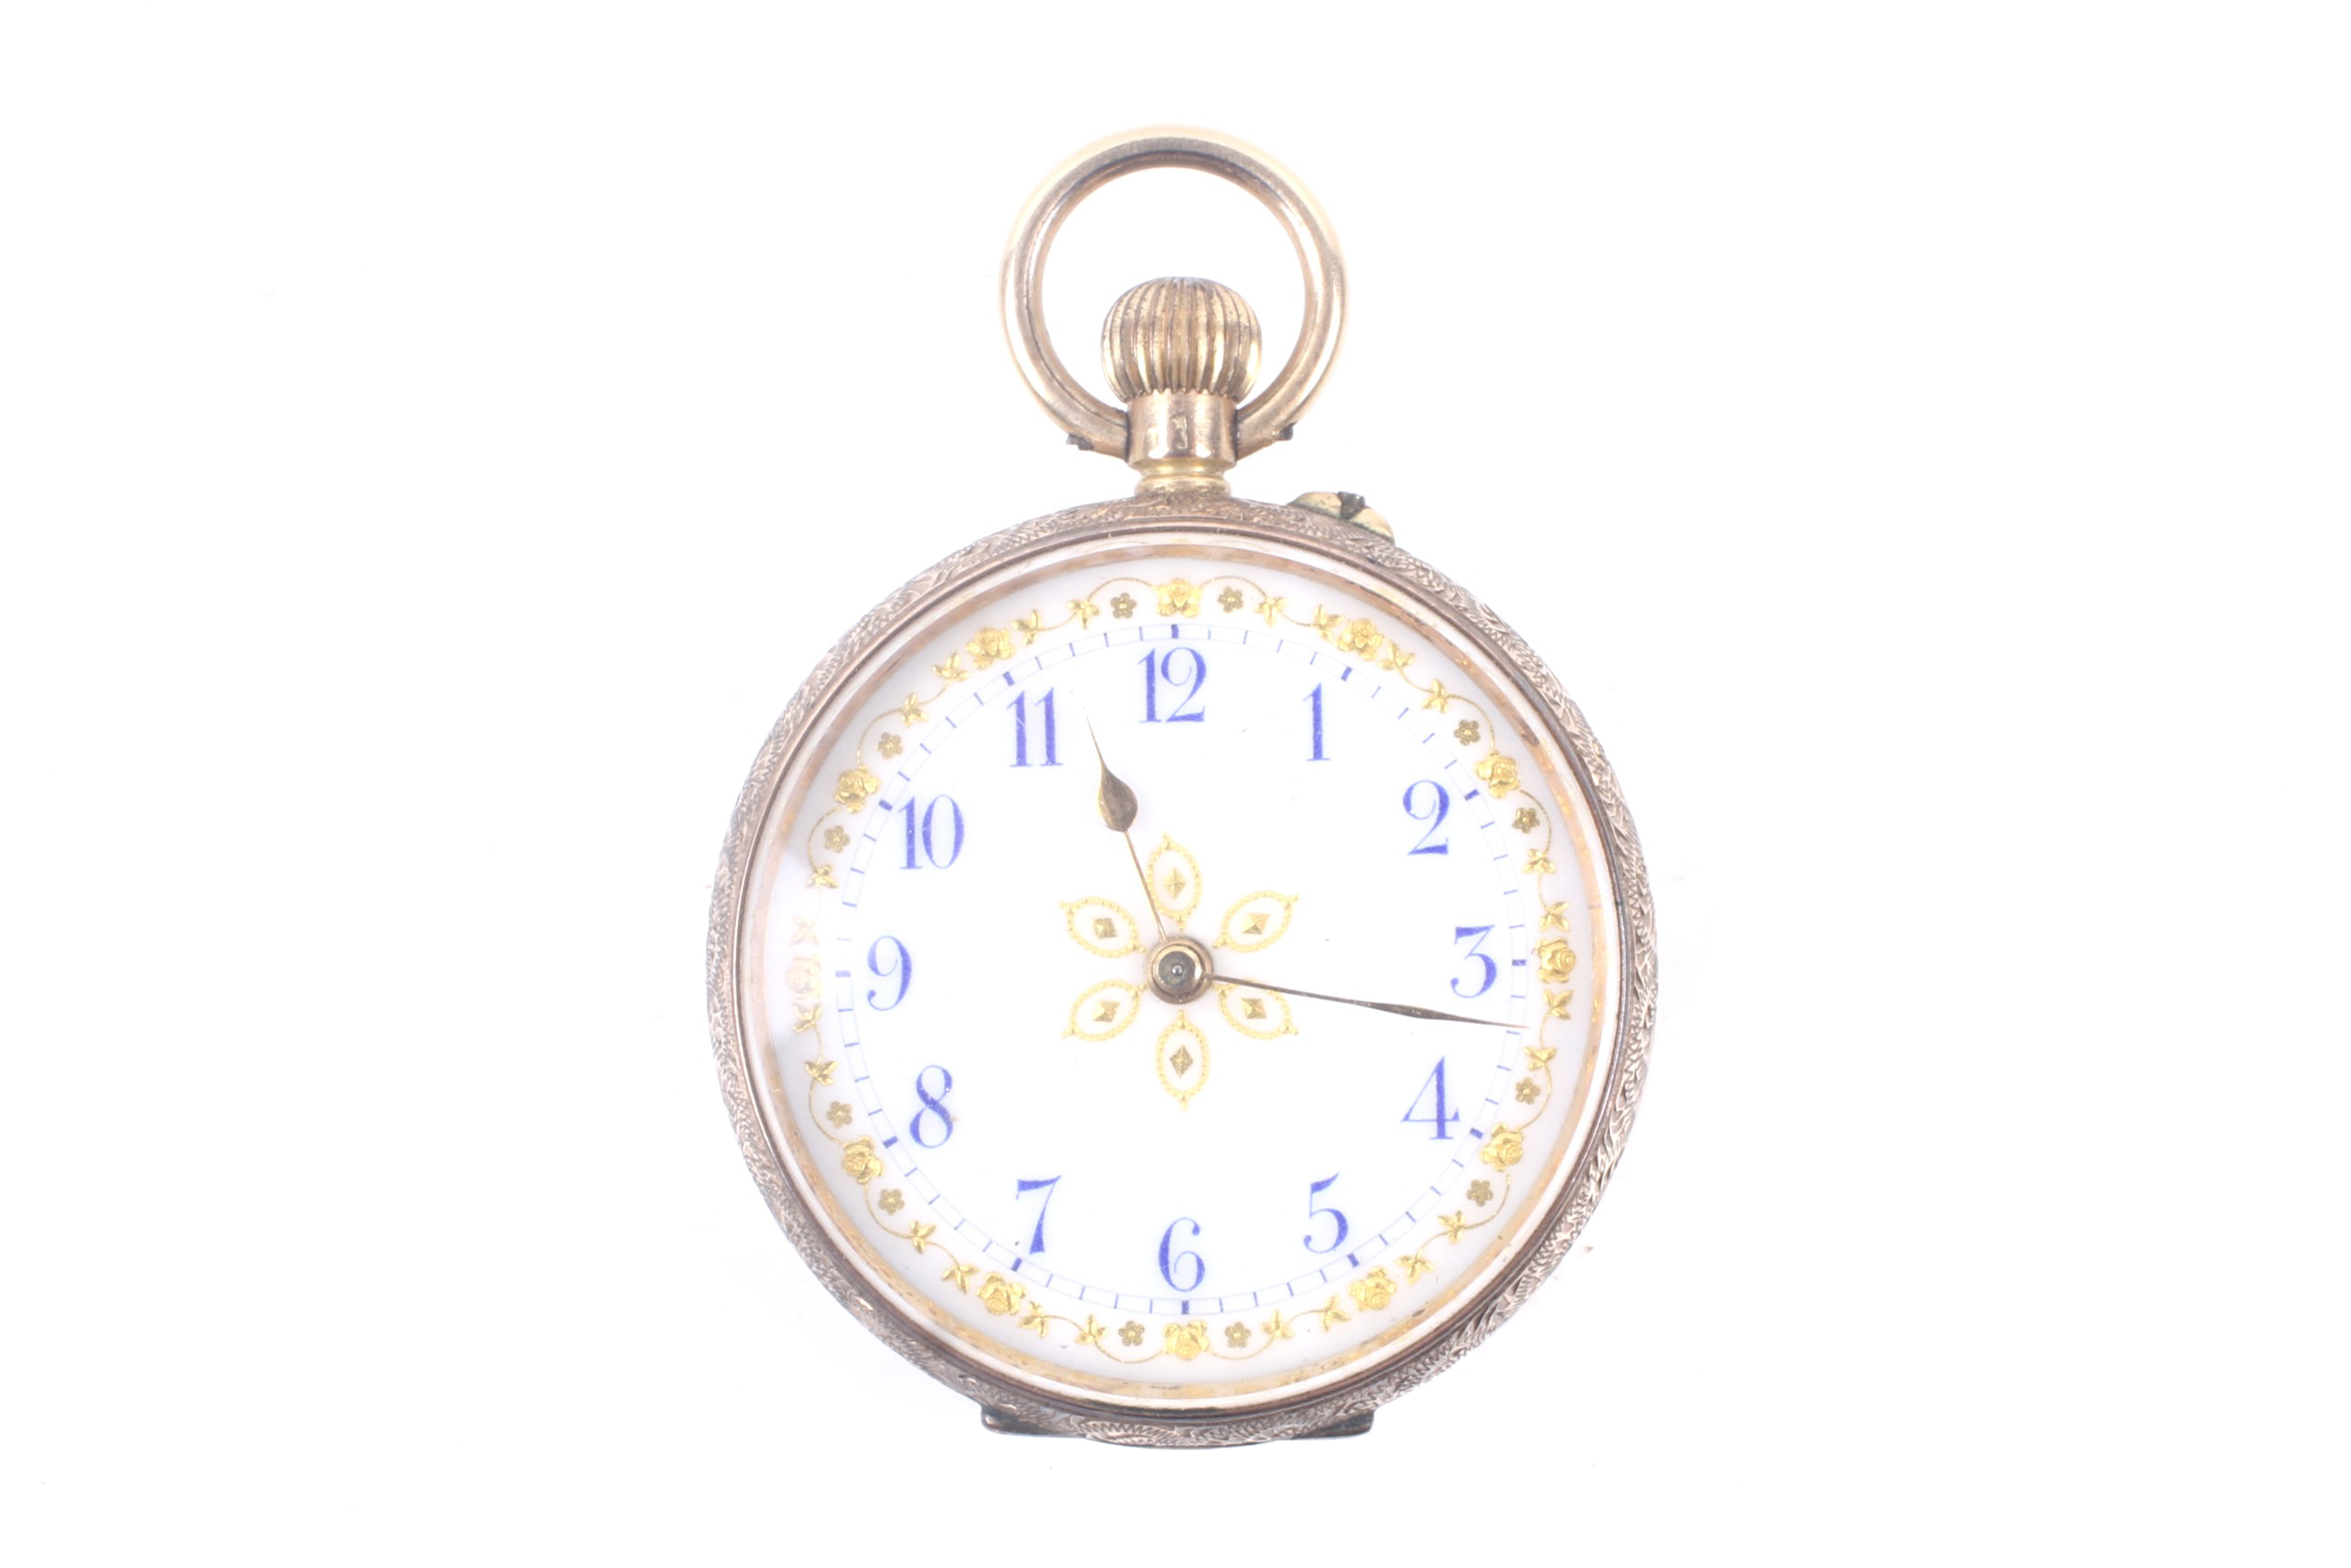 An early 20th century gold open face keyless fob watch.